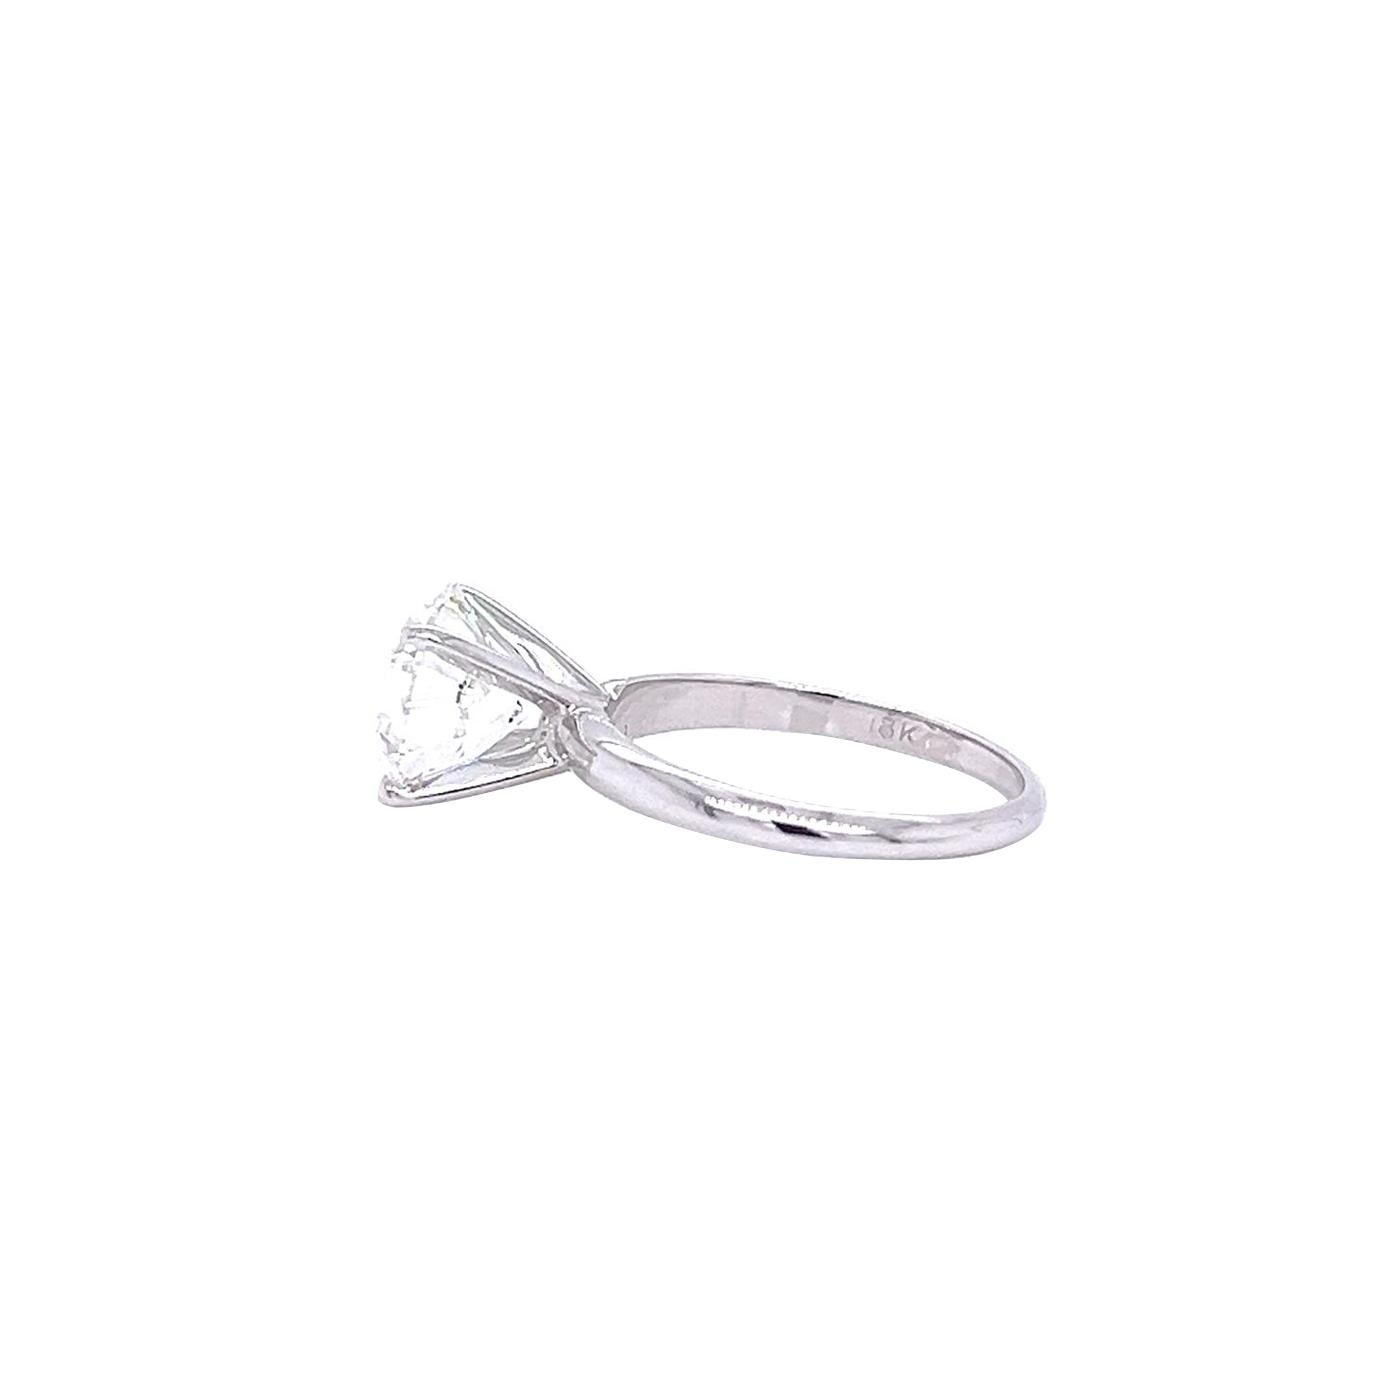 3.01 Carat GIA Round Brilliant Cut Tiffany style Ring 18K White Gold Si1 Clarity For Sale 2